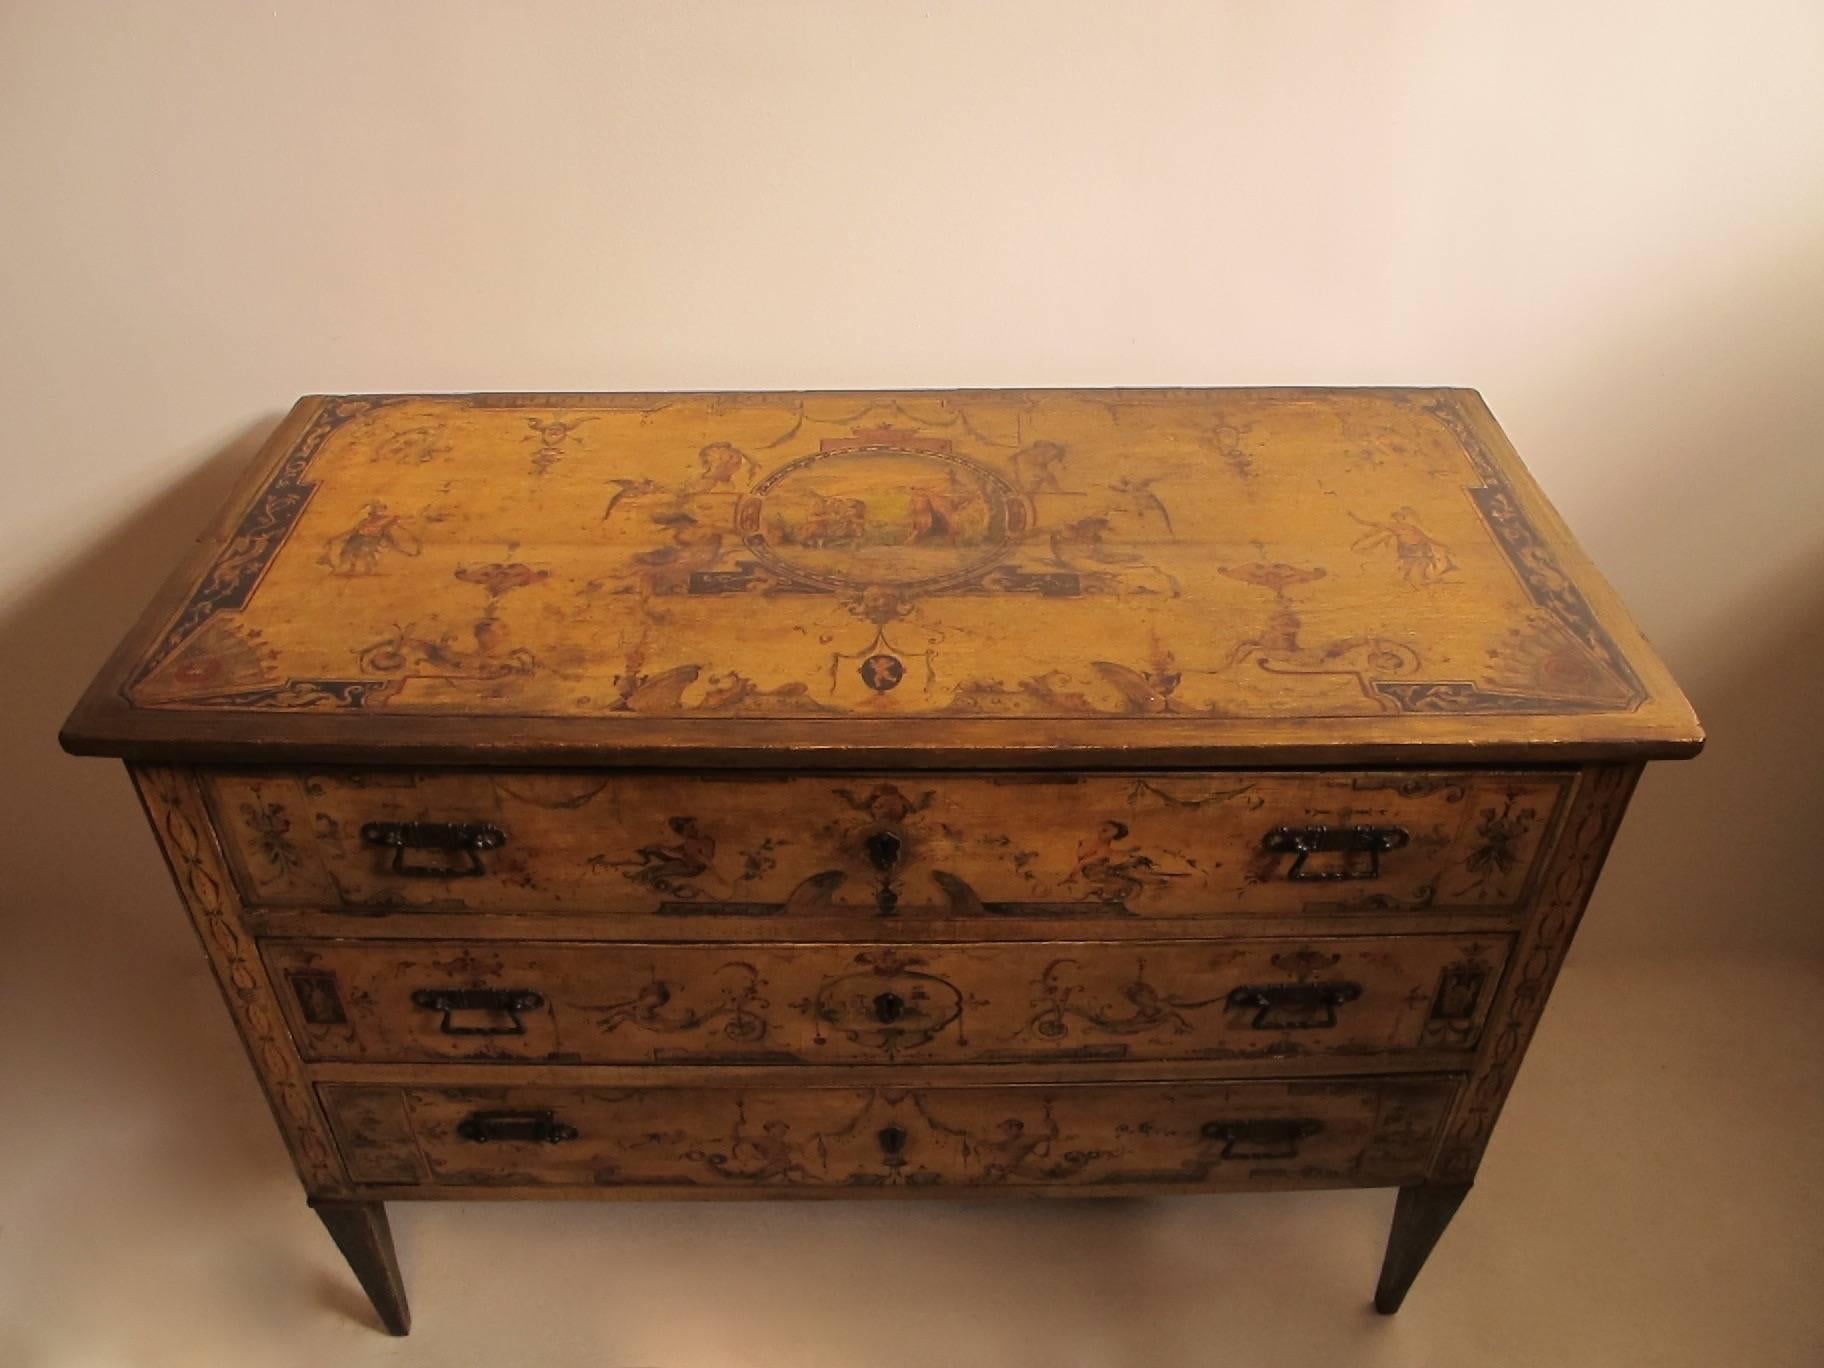 Hand-Painted 18th Century Italian Painted Commode